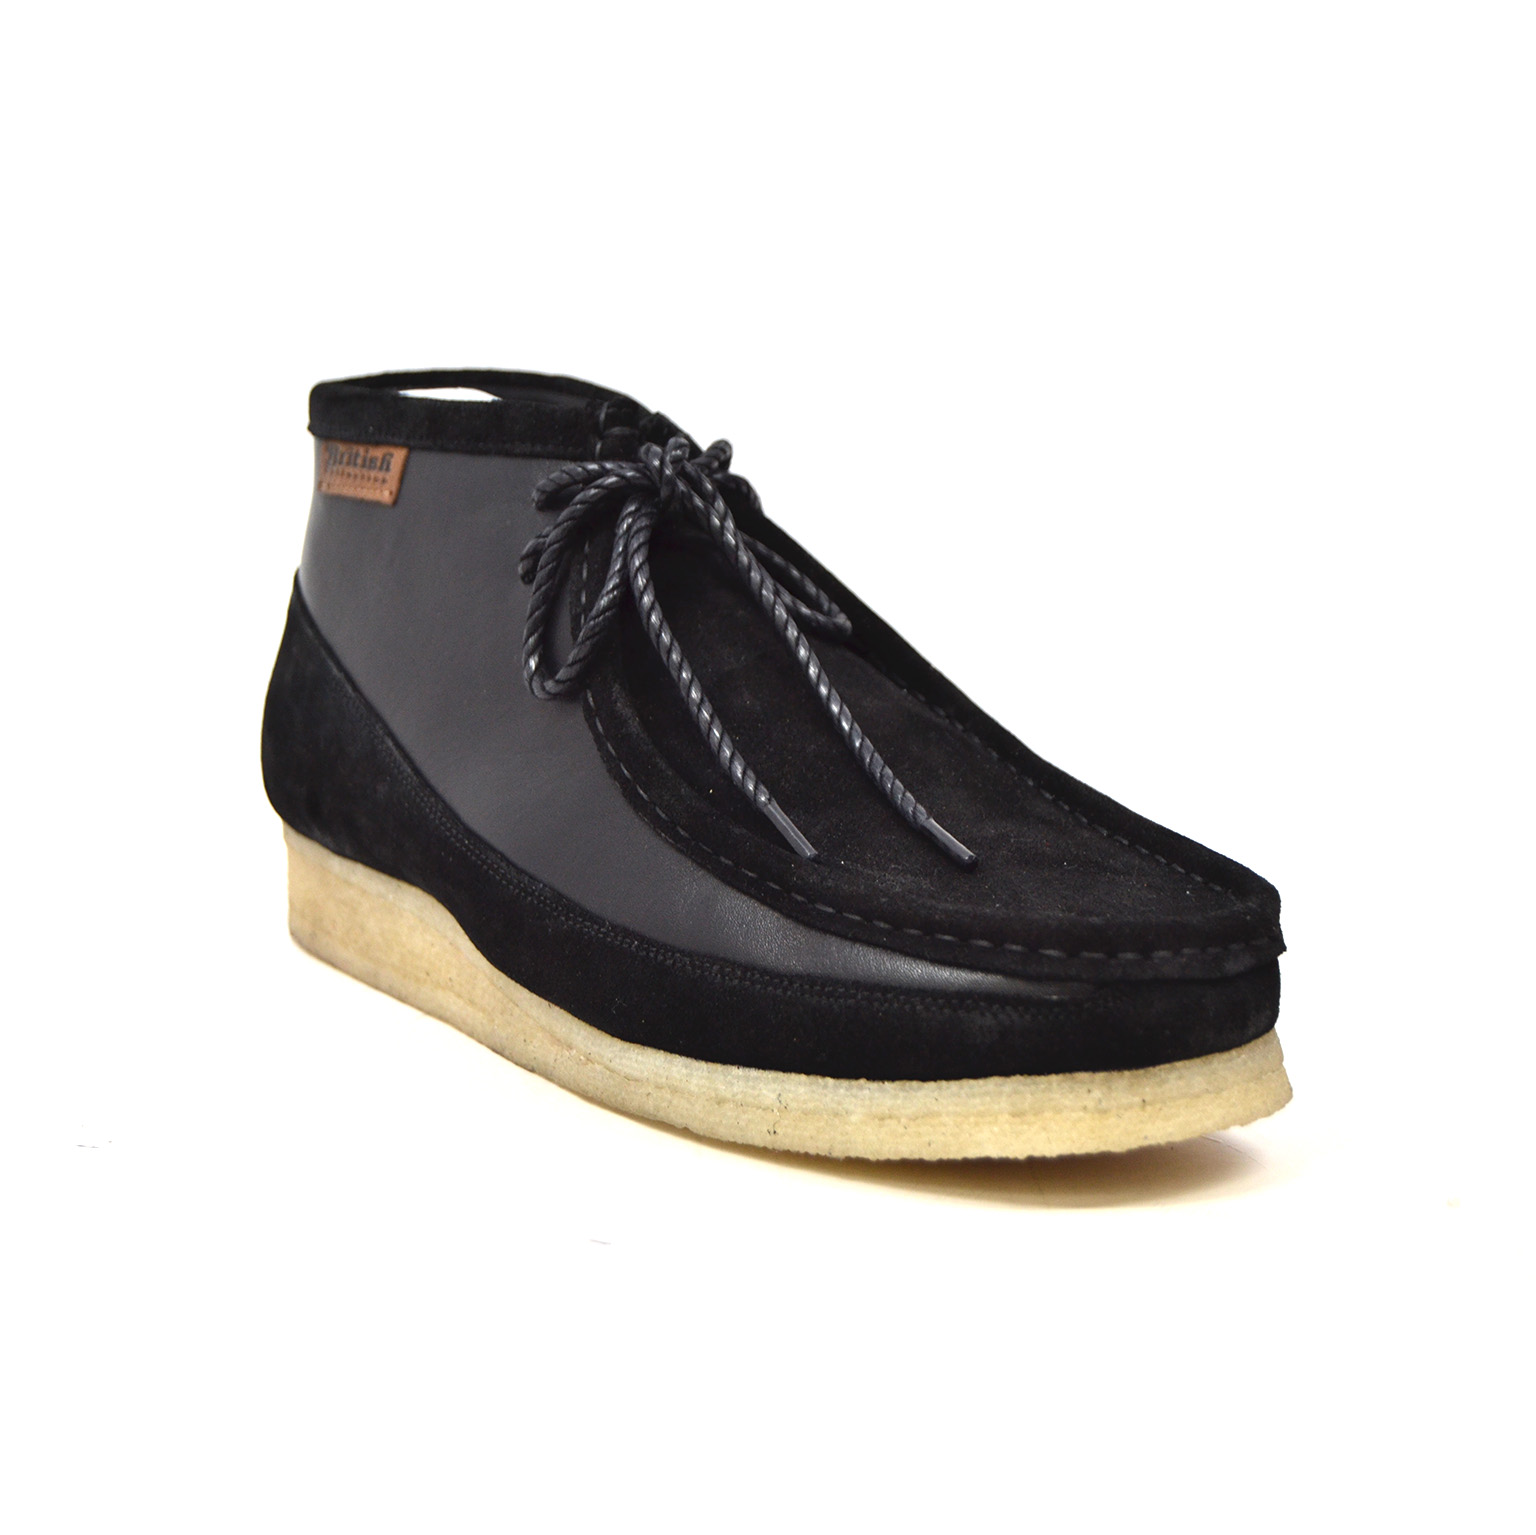 British Collection Walkers-Black Leather and Suede [100100-01] - $170. ...